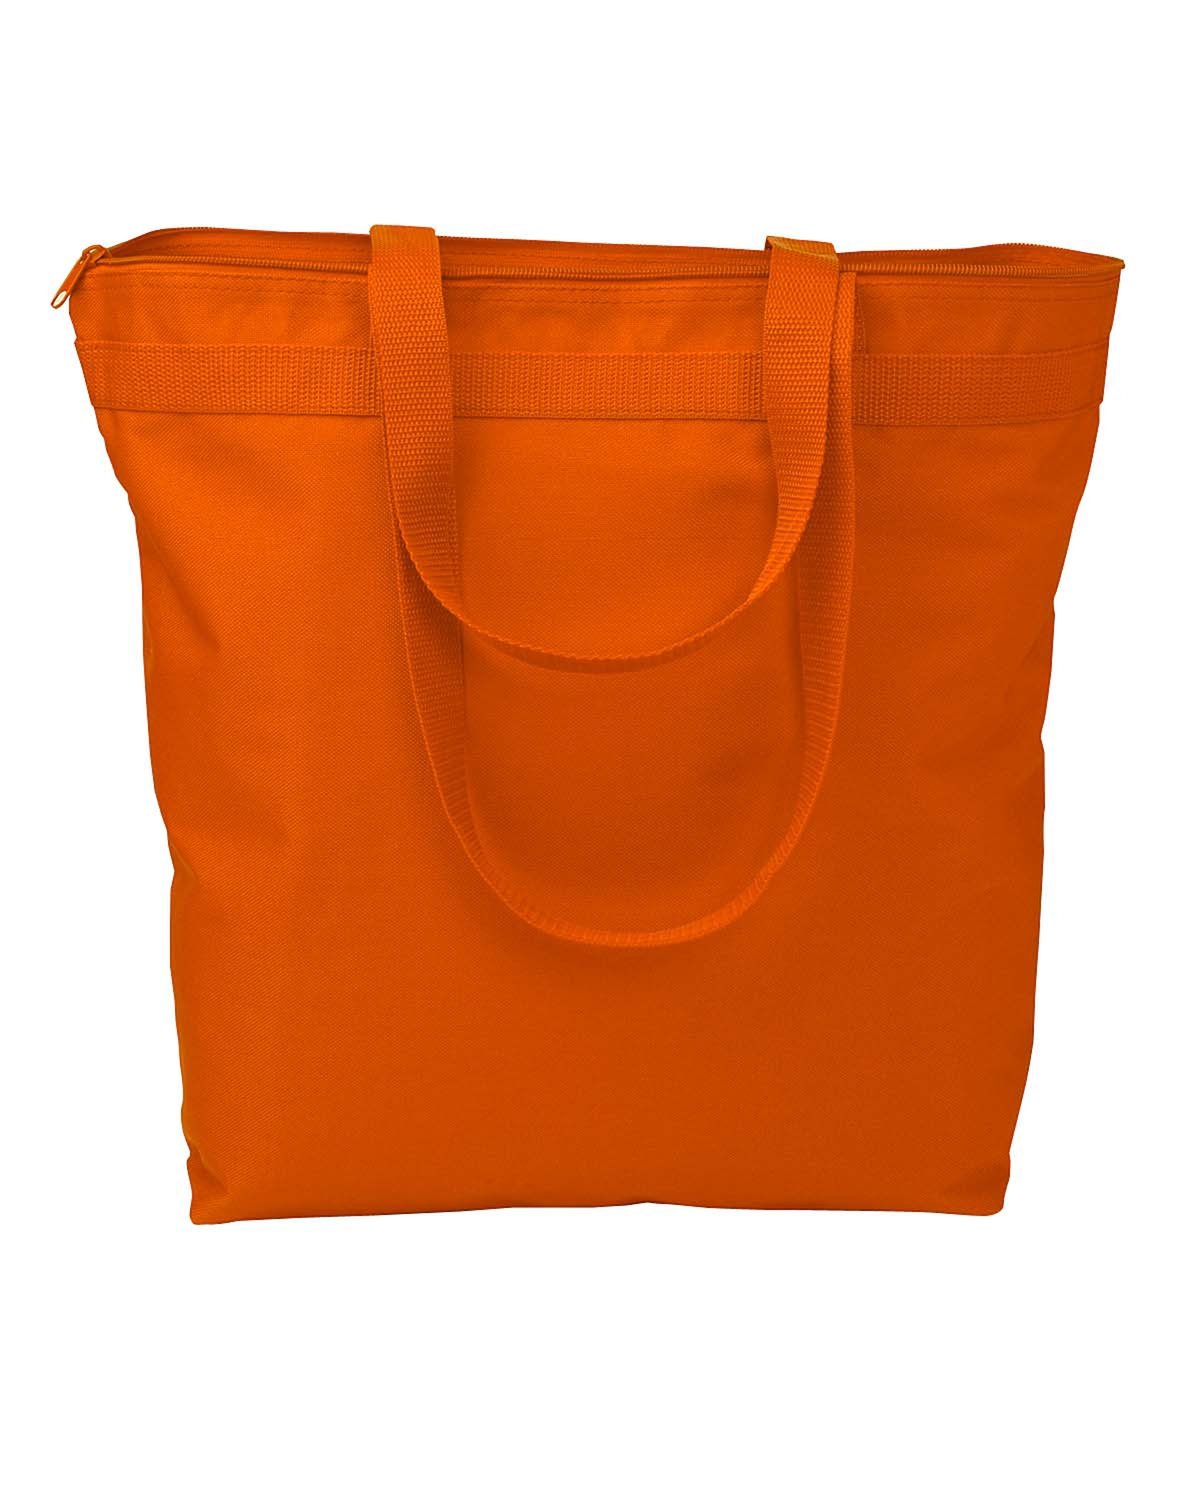 Bags and Accessories ORANGE OS Liberty Bags